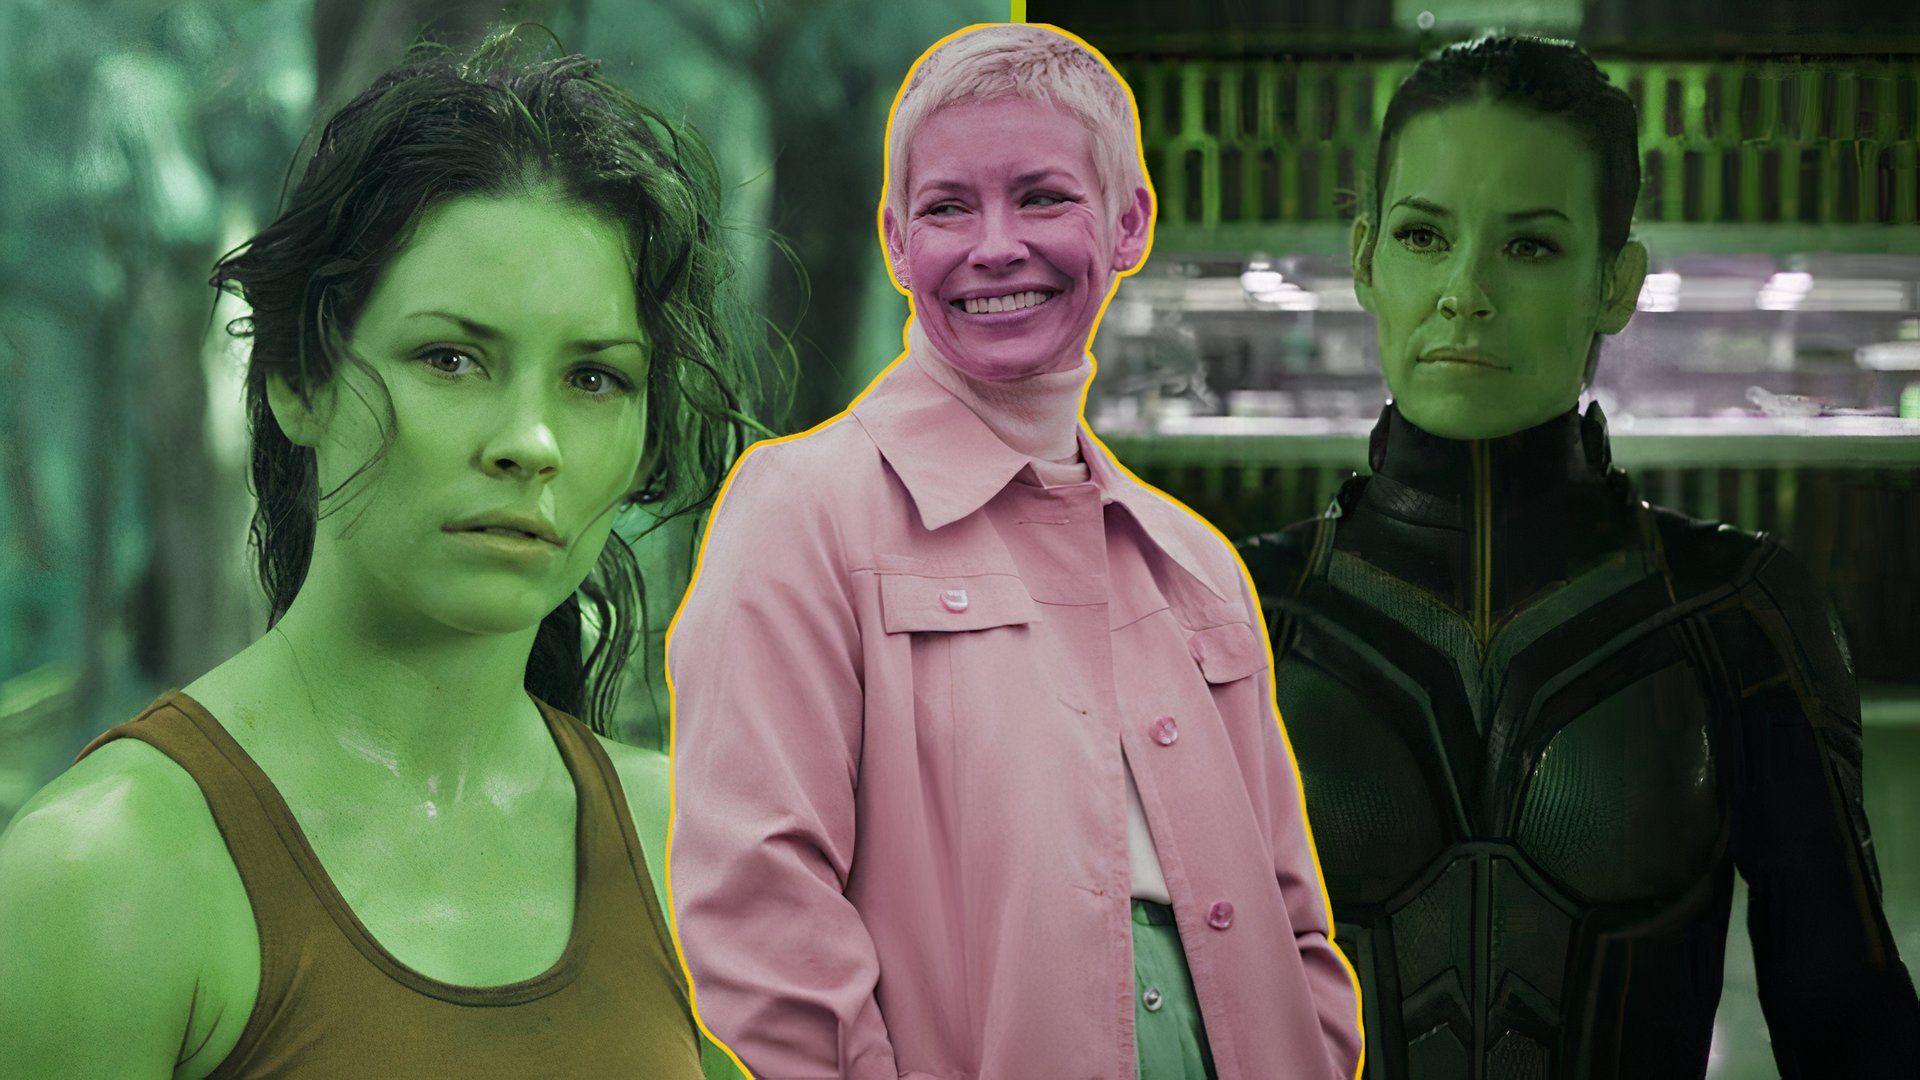 Evangeline Lilly in LOST, Ant-Man, and South of Heaven